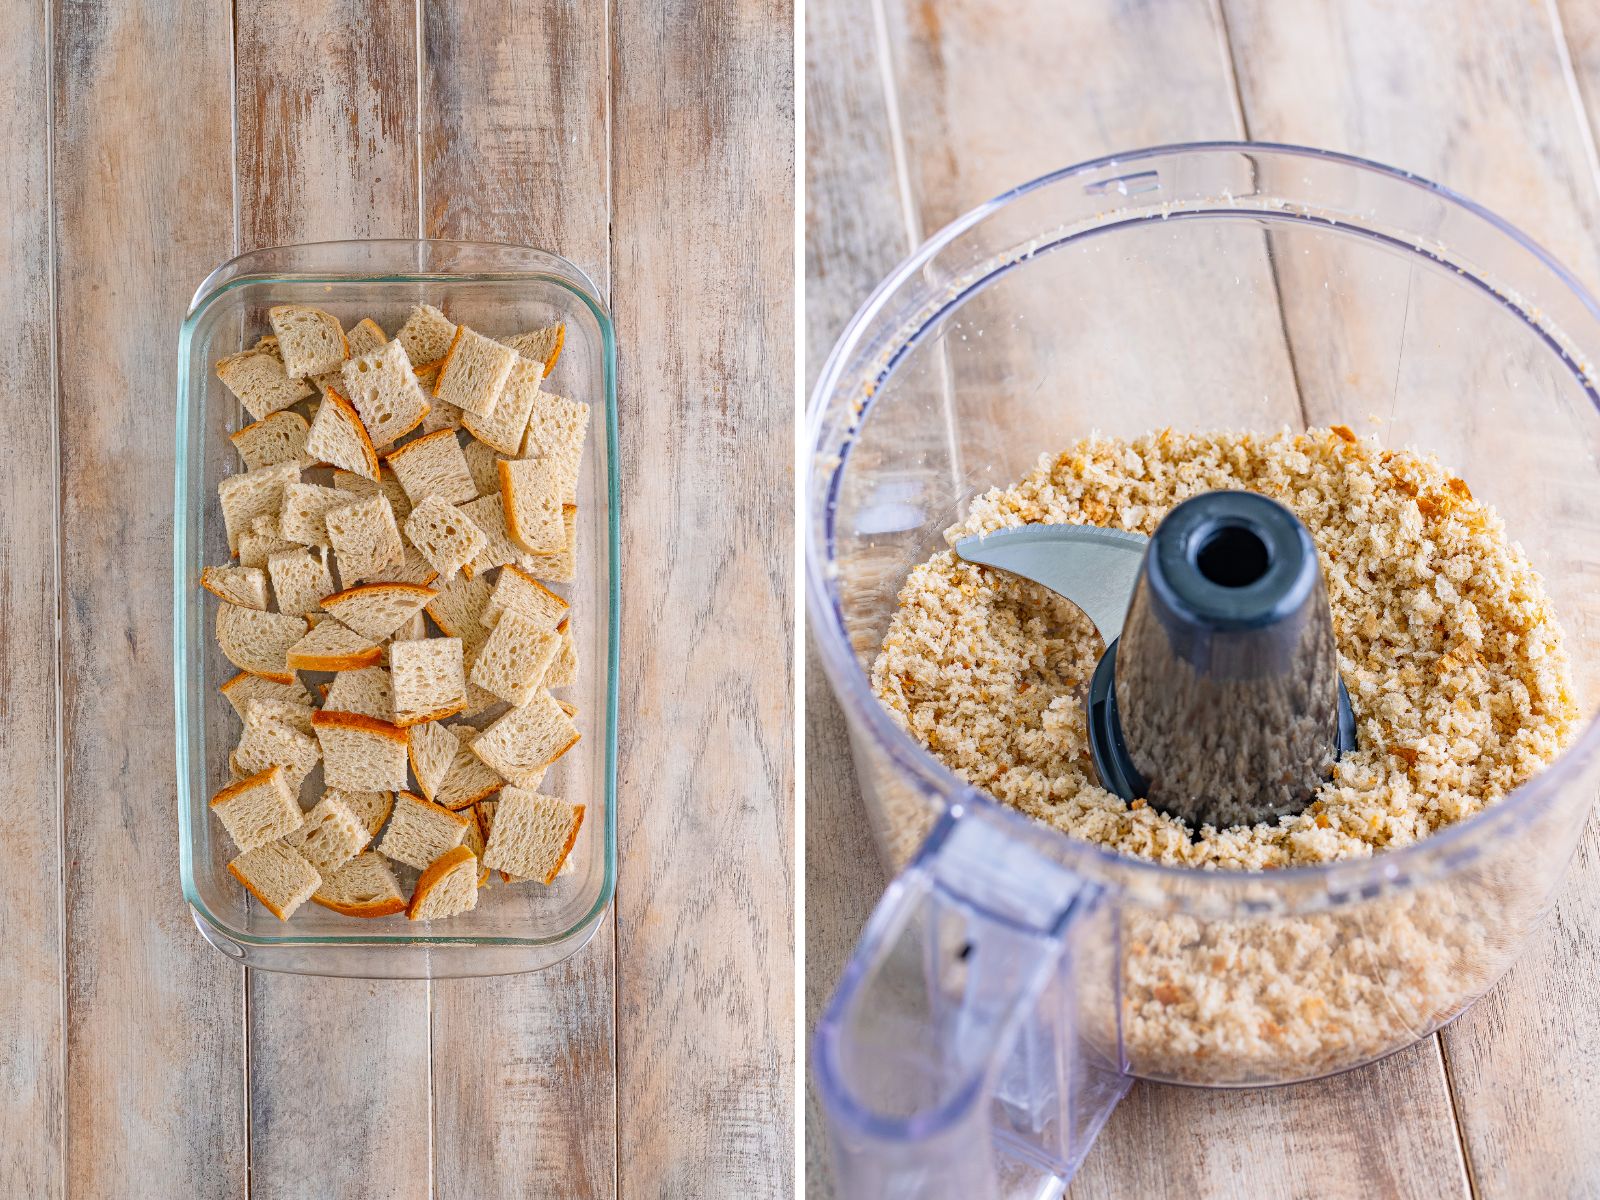 A collage of images with a baking dish filled with bread cubes and a food processor filled with bread crumbs.